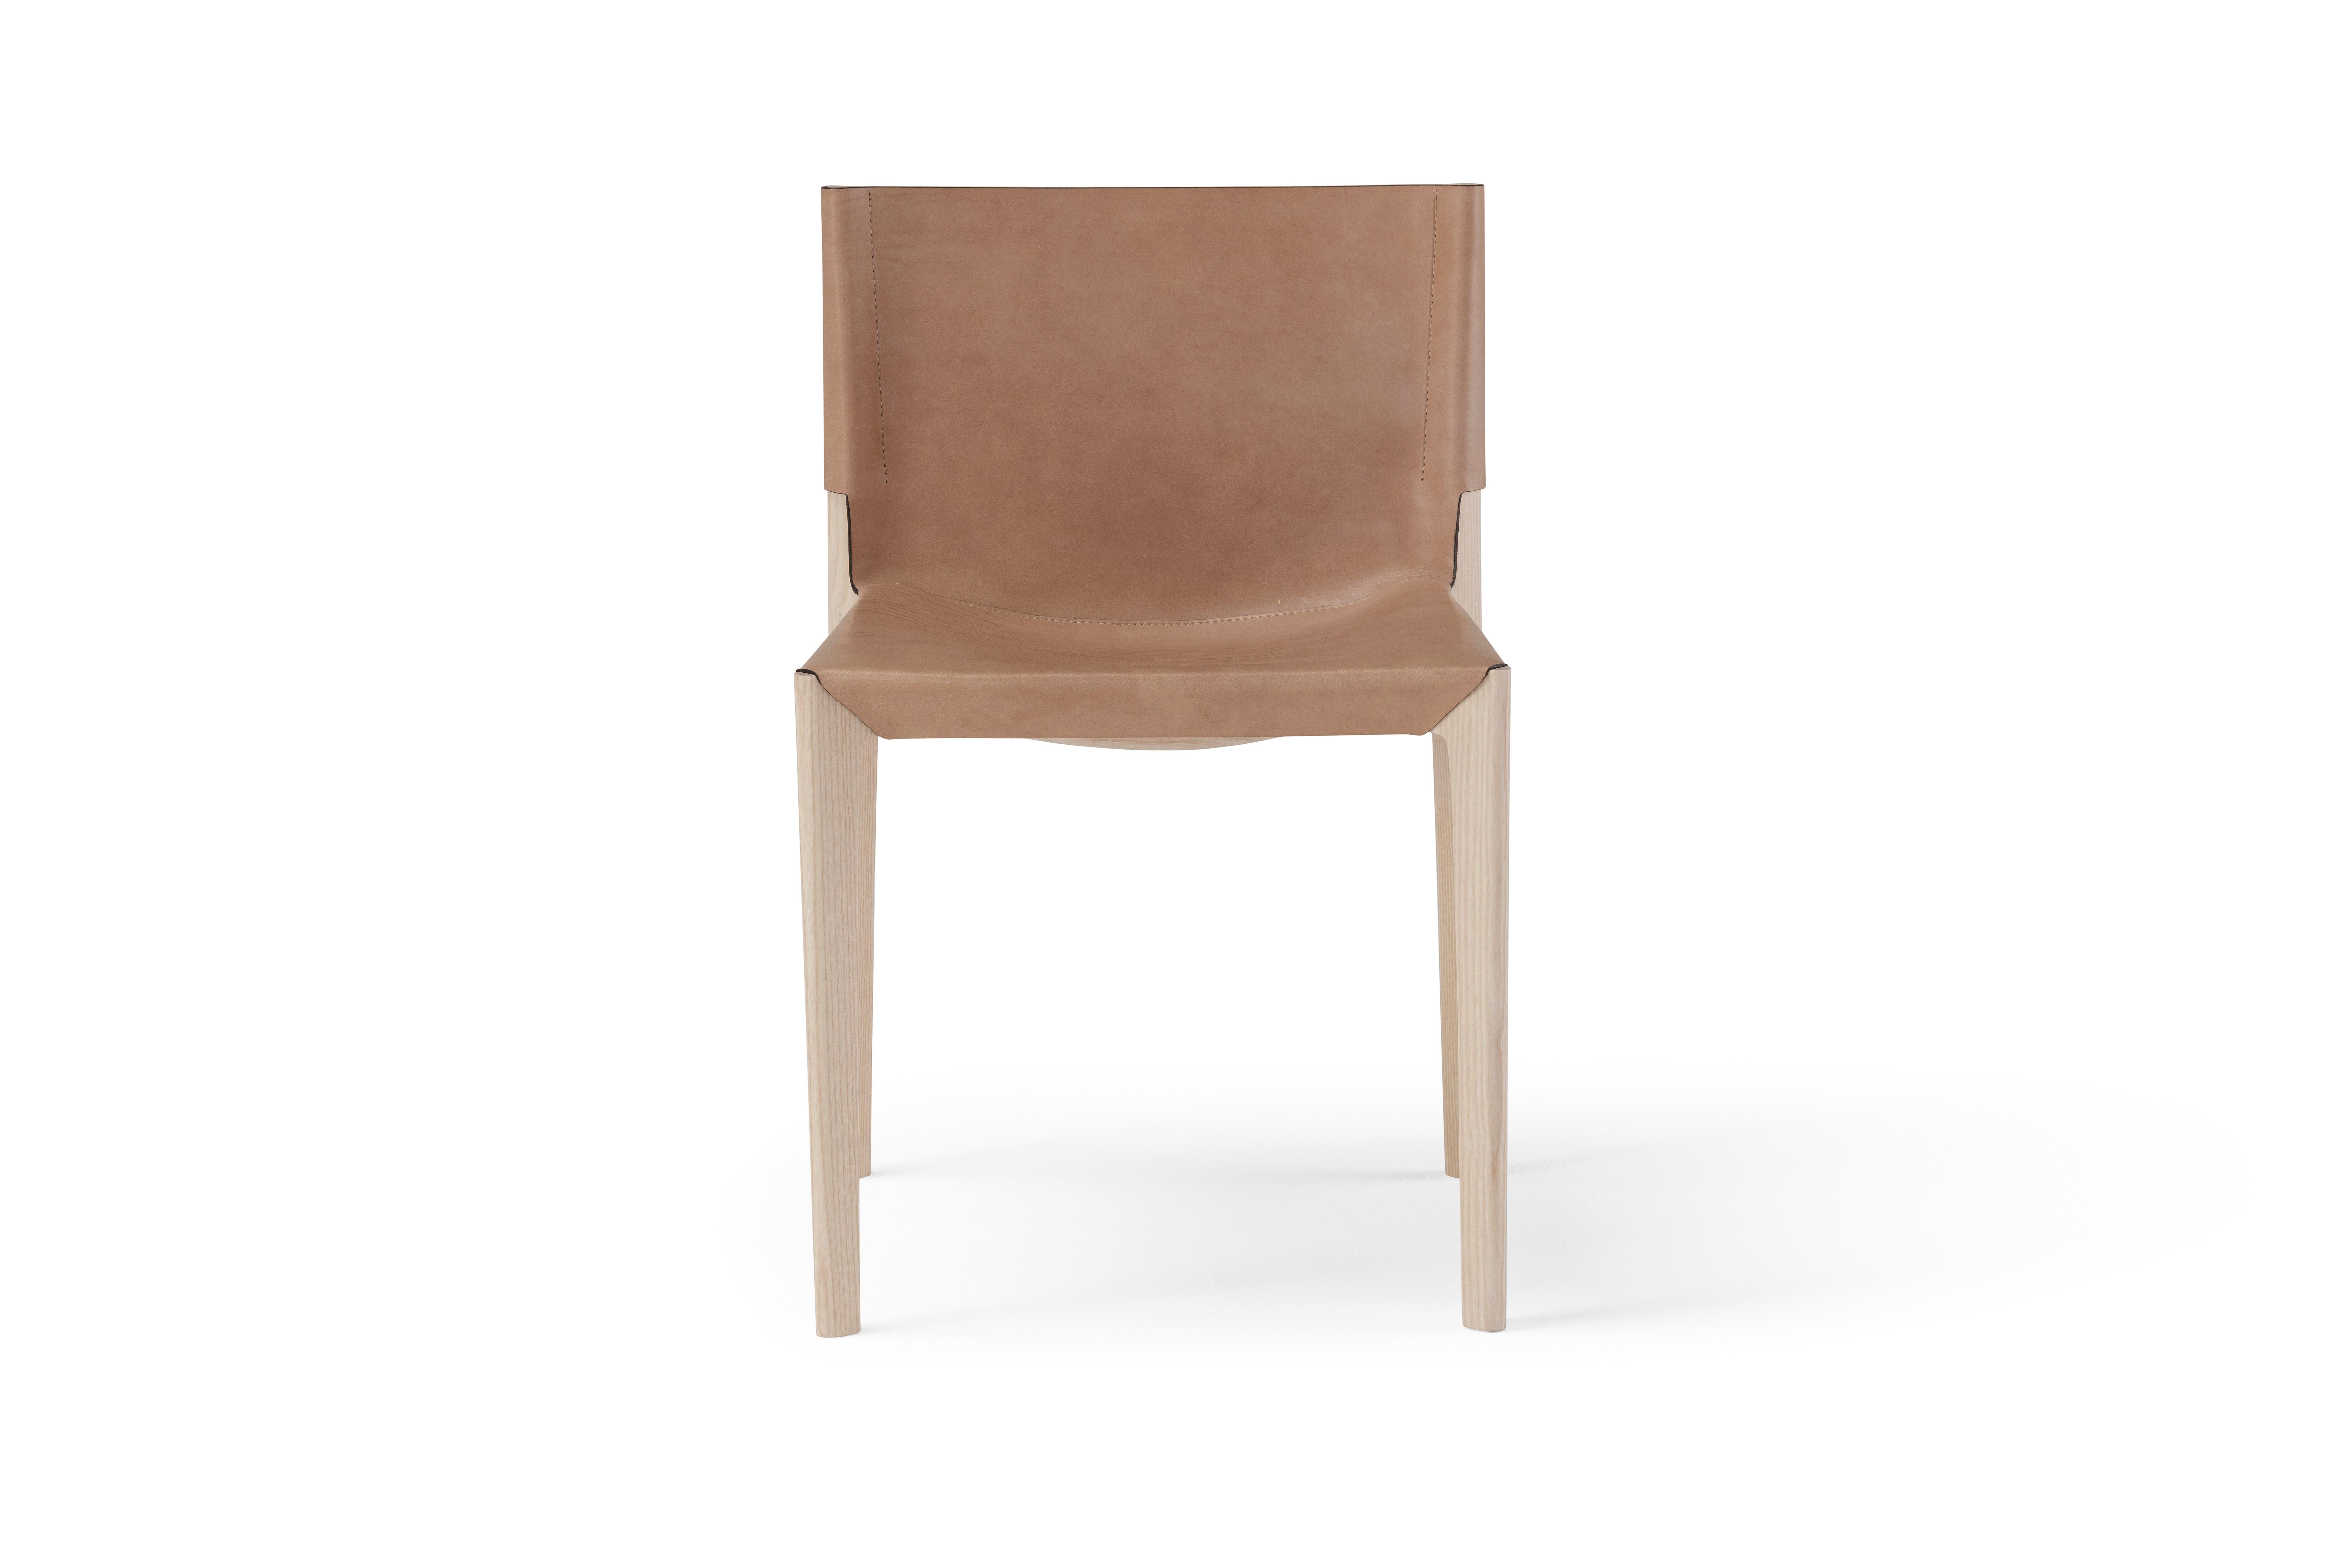 Wooden Chair 'Stilt', Cuoio & Wood
Designer Stefano Grassi

Height: 75 cm 
Width: 49 cm
Depth: 49 cm 

STILT is the chair from essential design and balanced shapes that recall serenity and home warmth. Its solid wood structure reminds the ancient